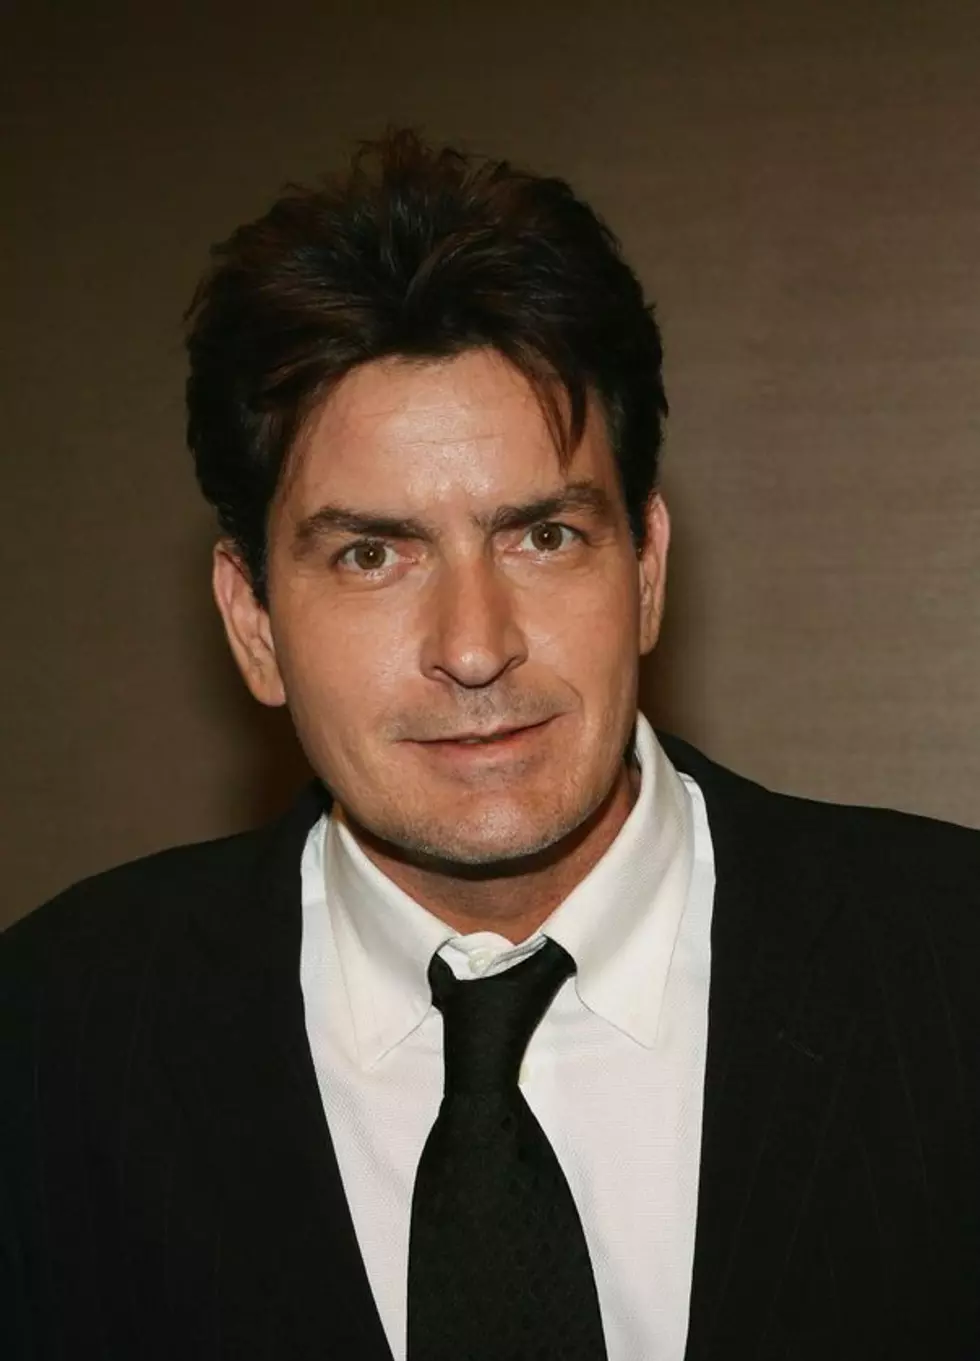 The Mess That Is Charlie Sheen [AUDIO]